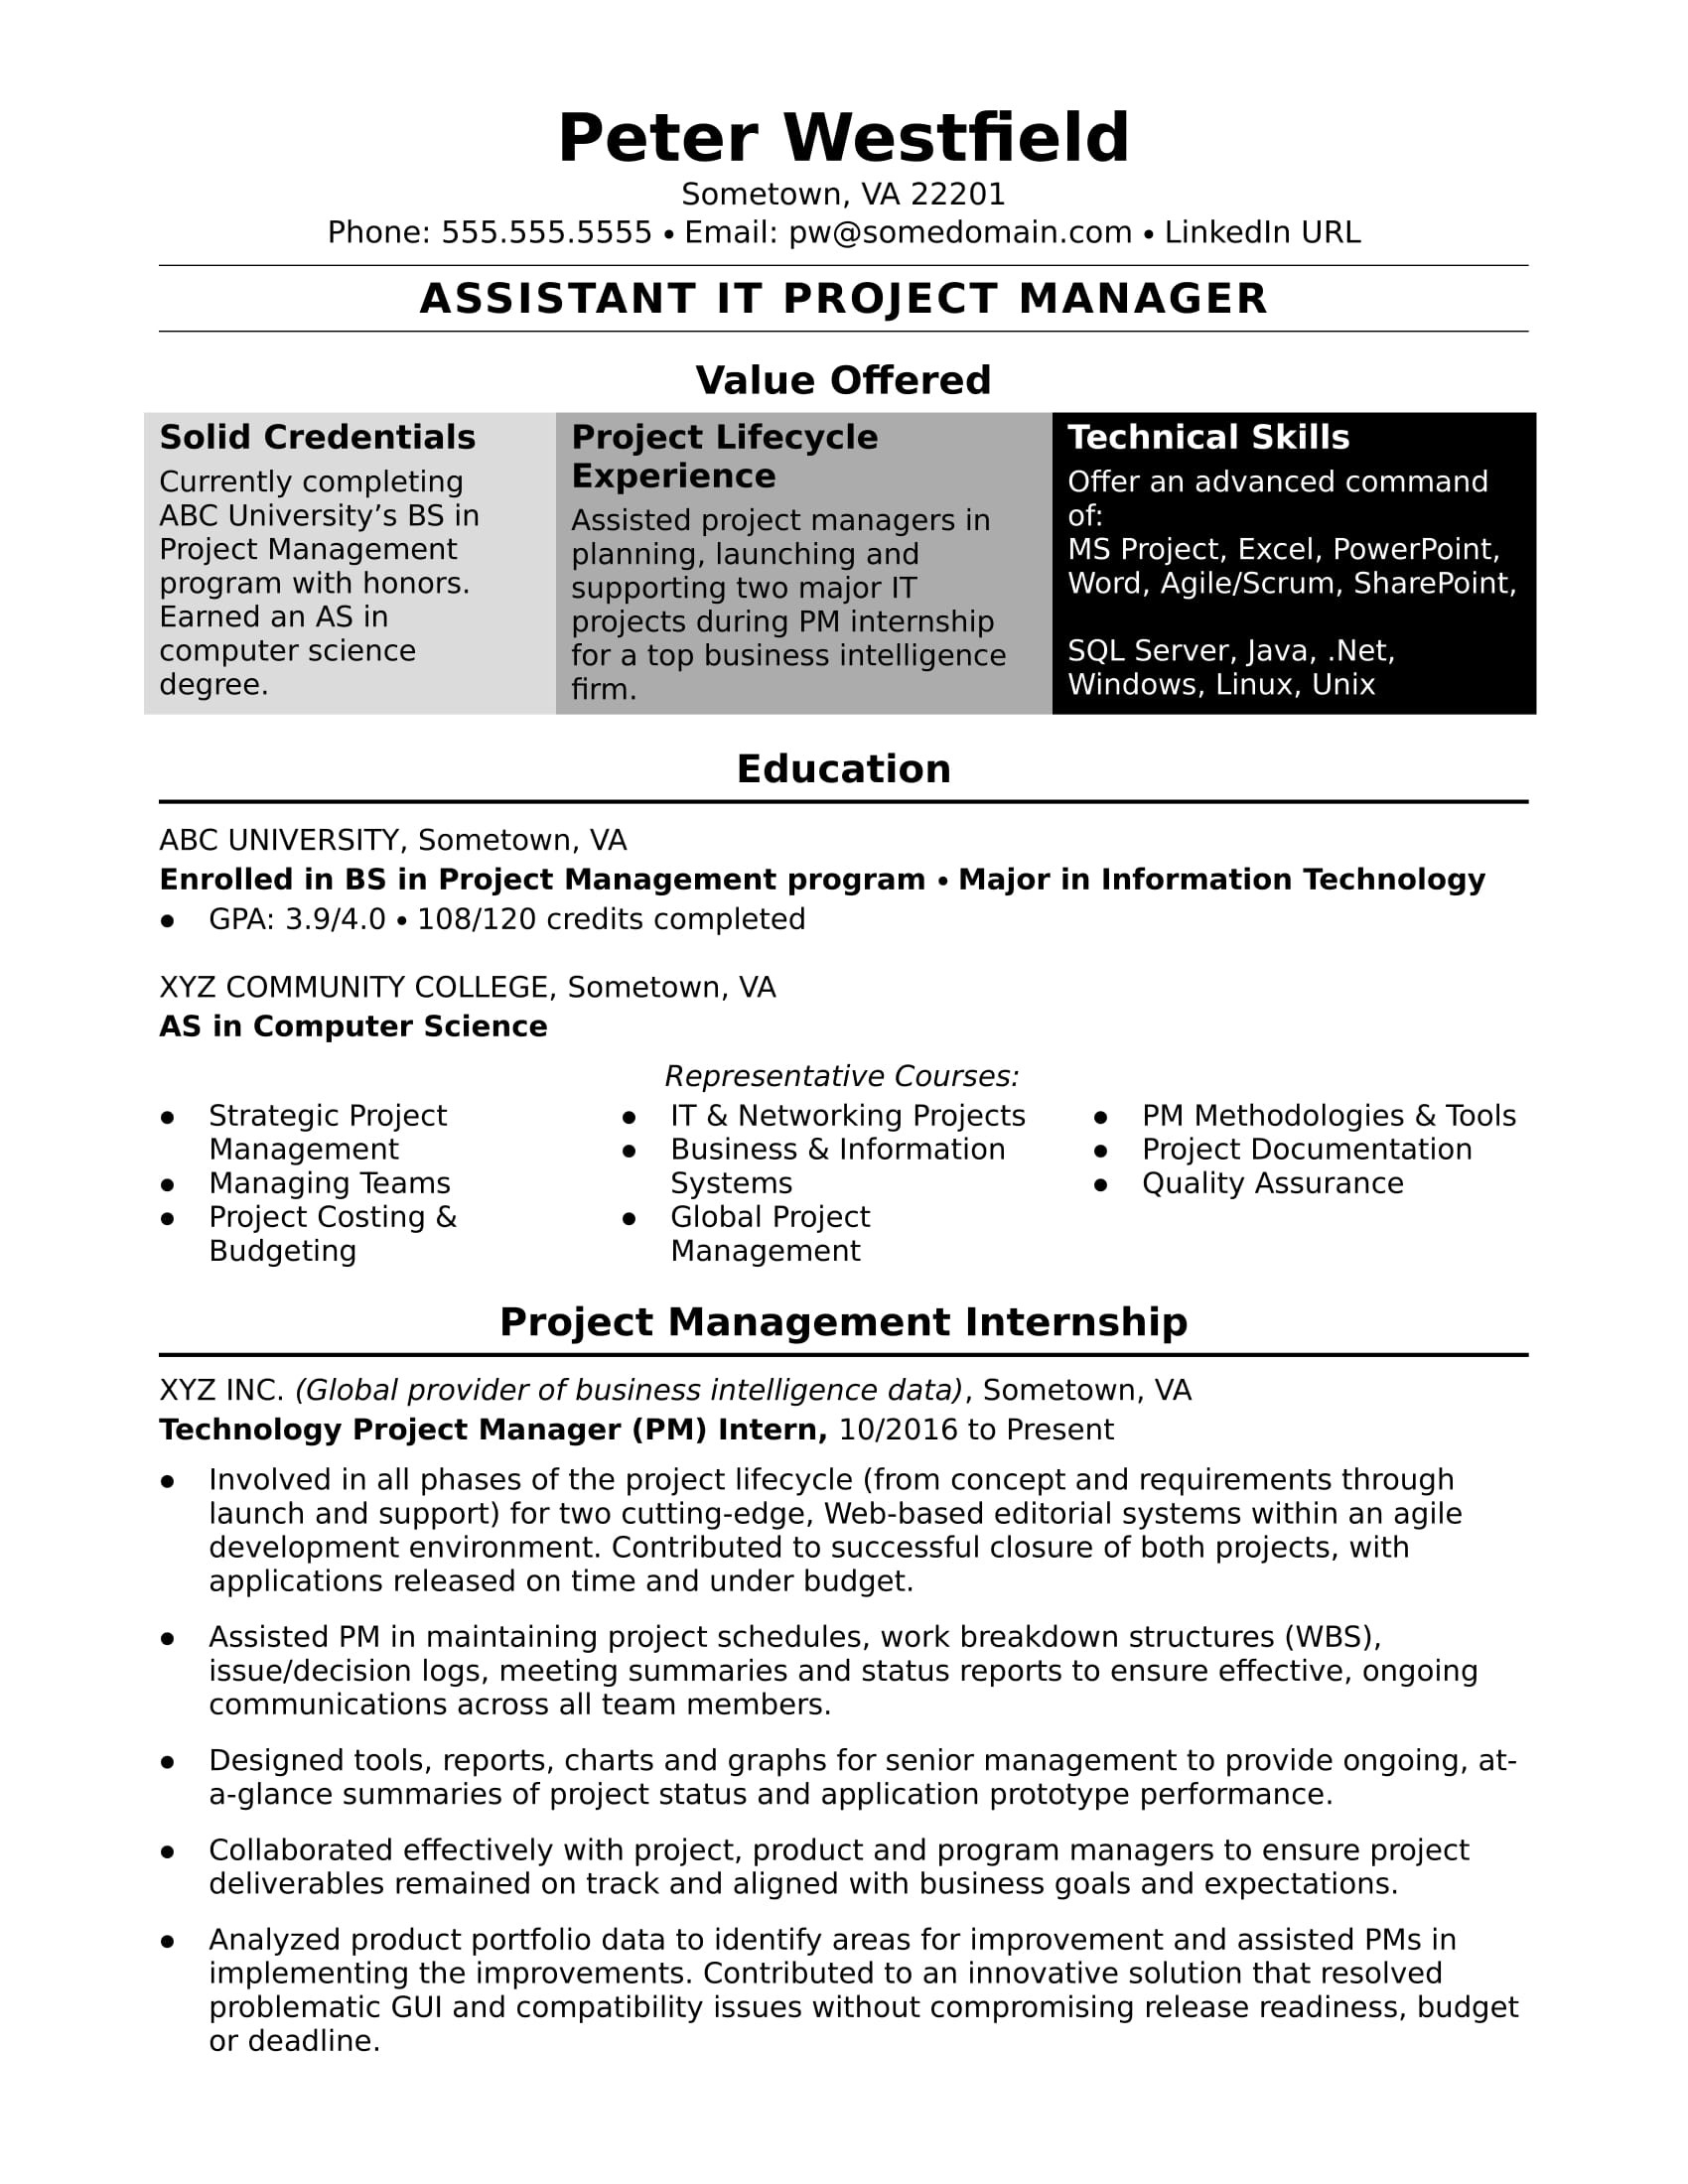 Sample Resume for assistant Project Manager Construction Sample Resume for An assistant It Project Manager Monster.com